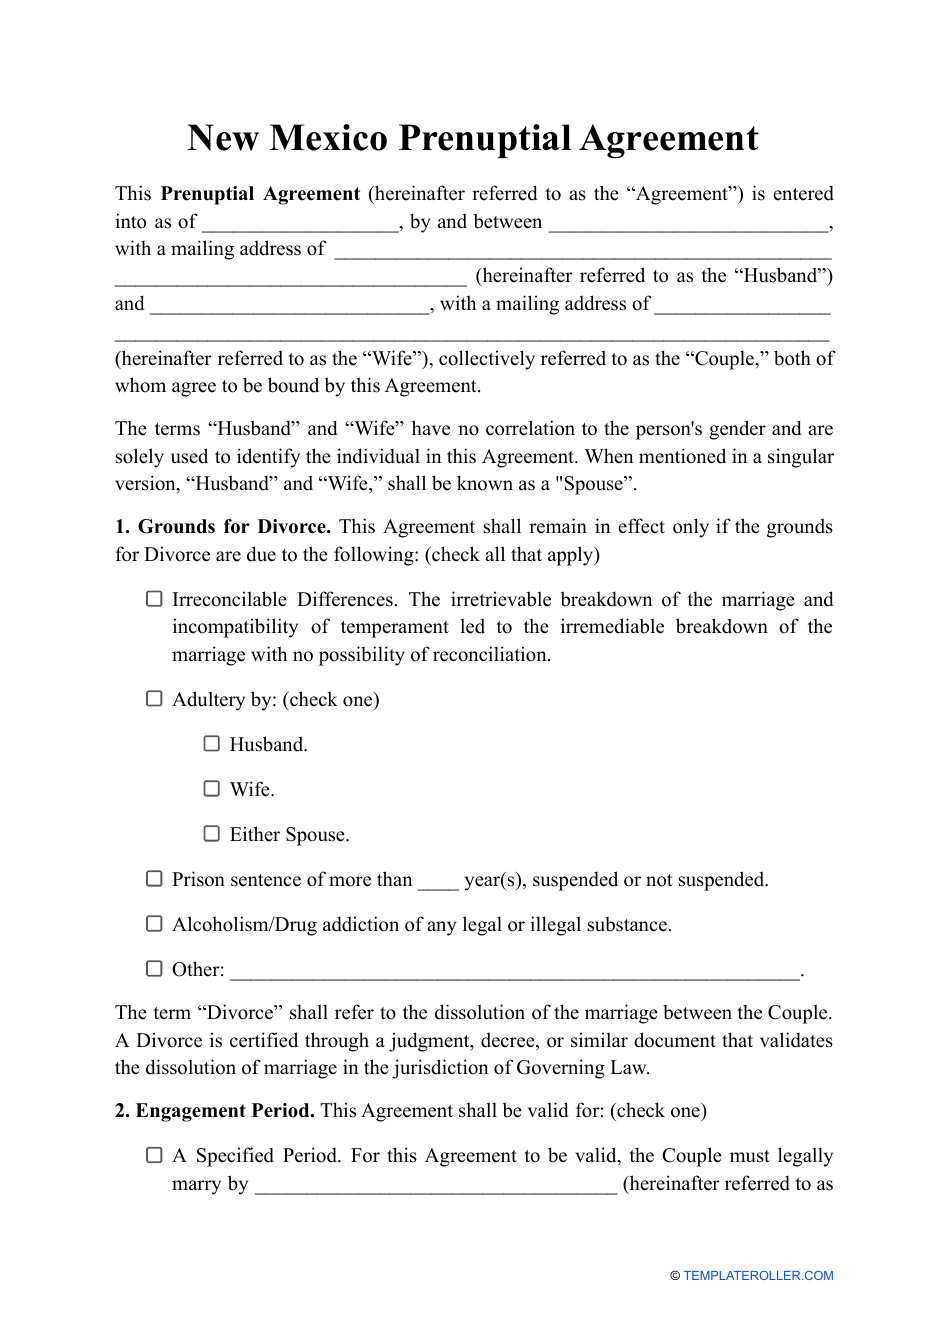 Prenuptial Agreement Template - New Mexico, Page 1